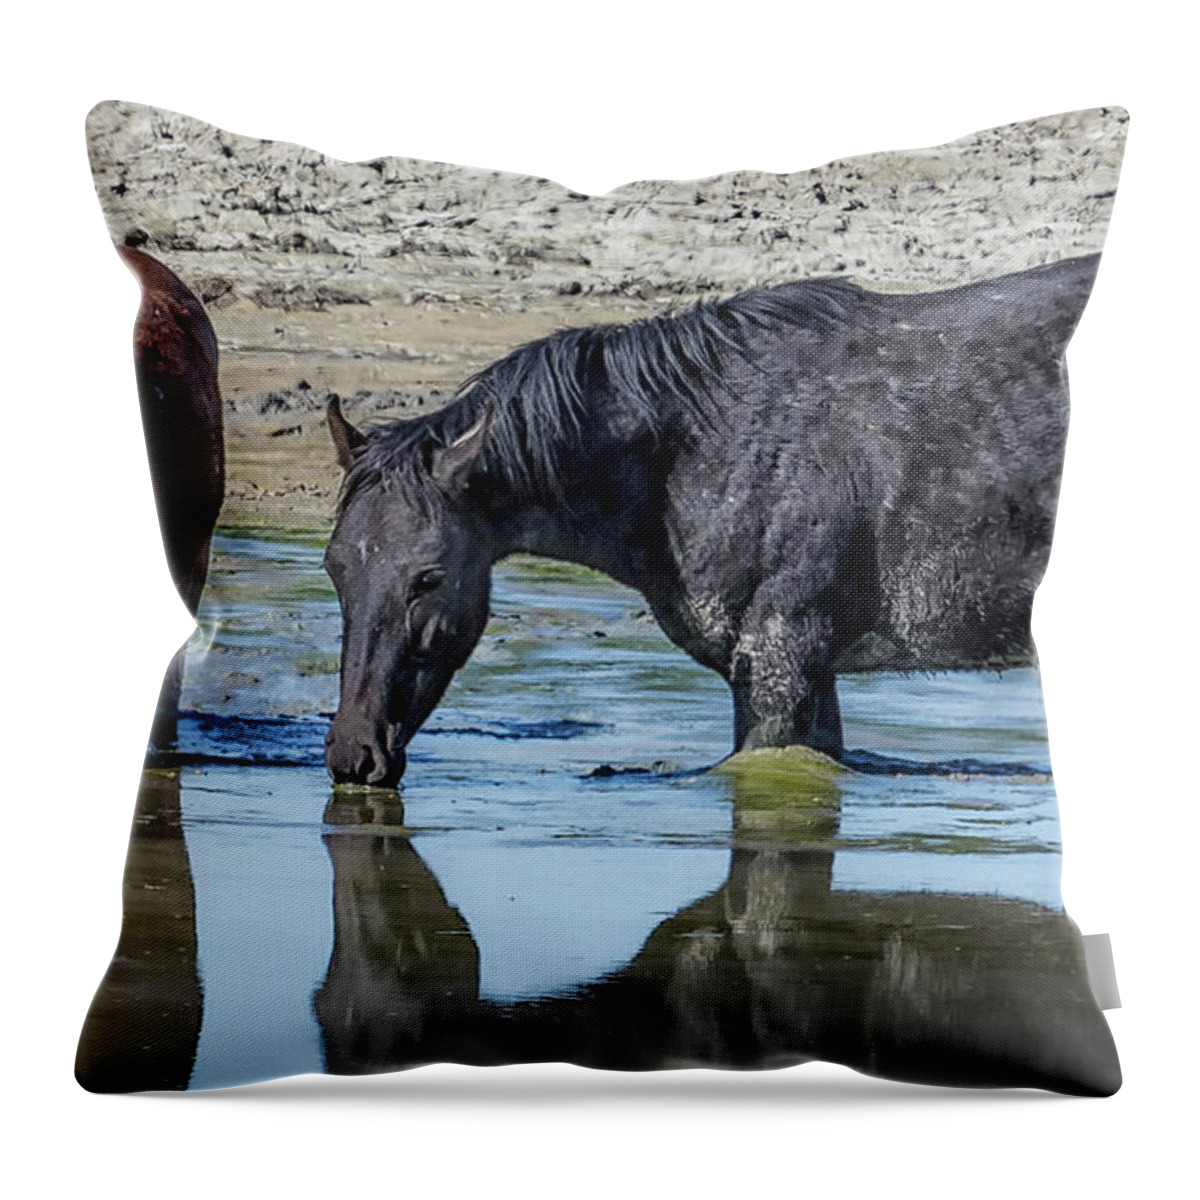 Palomino Buttes Throw Pillow featuring the photograph Palomino Buttes Bandmates, No. 2 by Belinda Greb